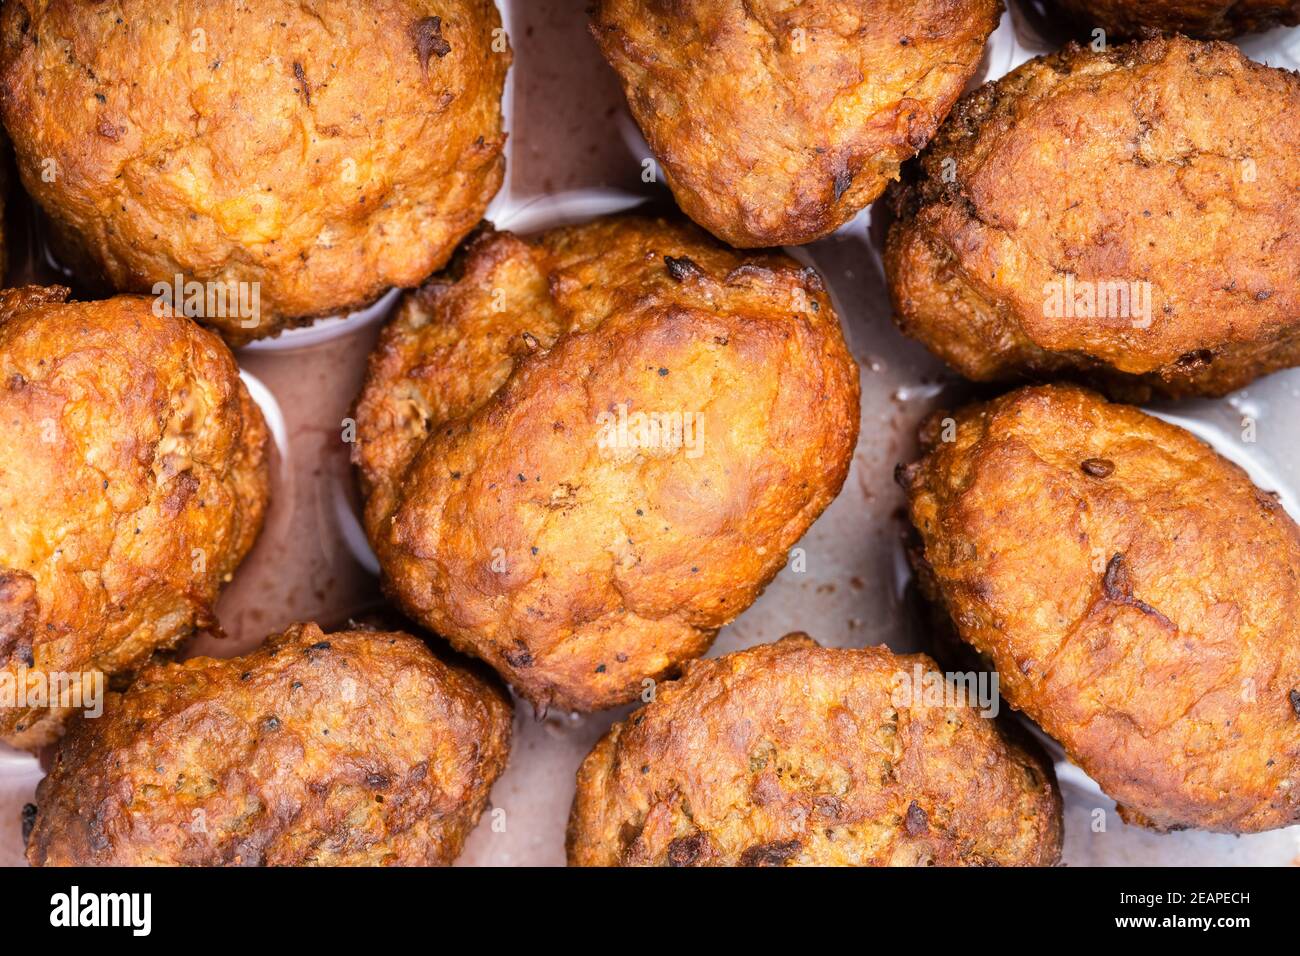 top view of cooked swedish meatballs close up Stock Photo